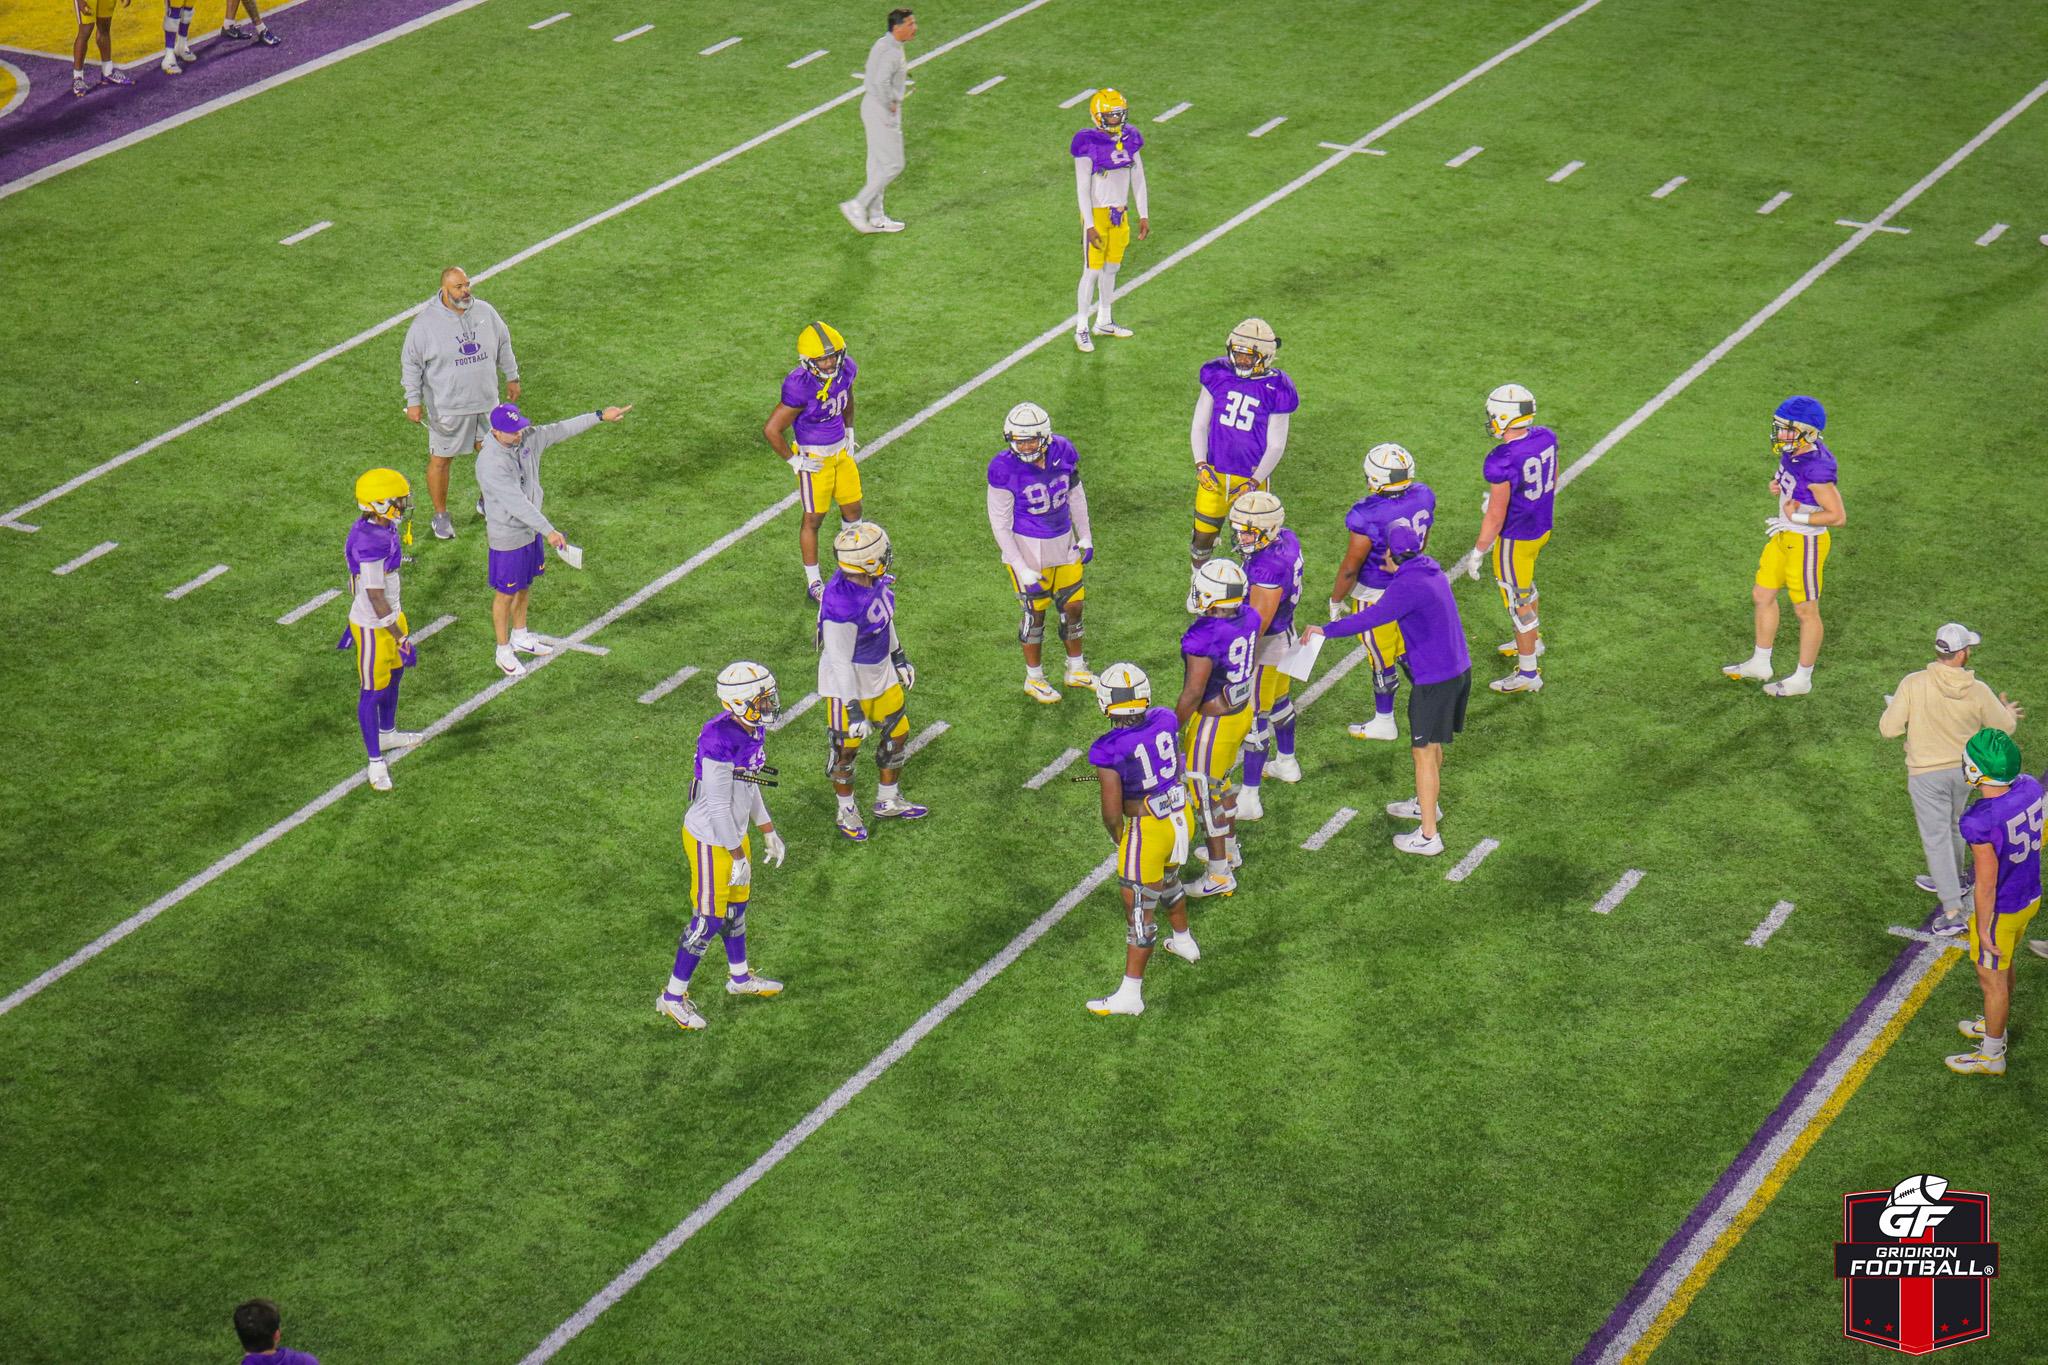 LSU Spring Practice Report #4: Emery Jones Back With 1st Team, QB2 Competition Heating Up, & More